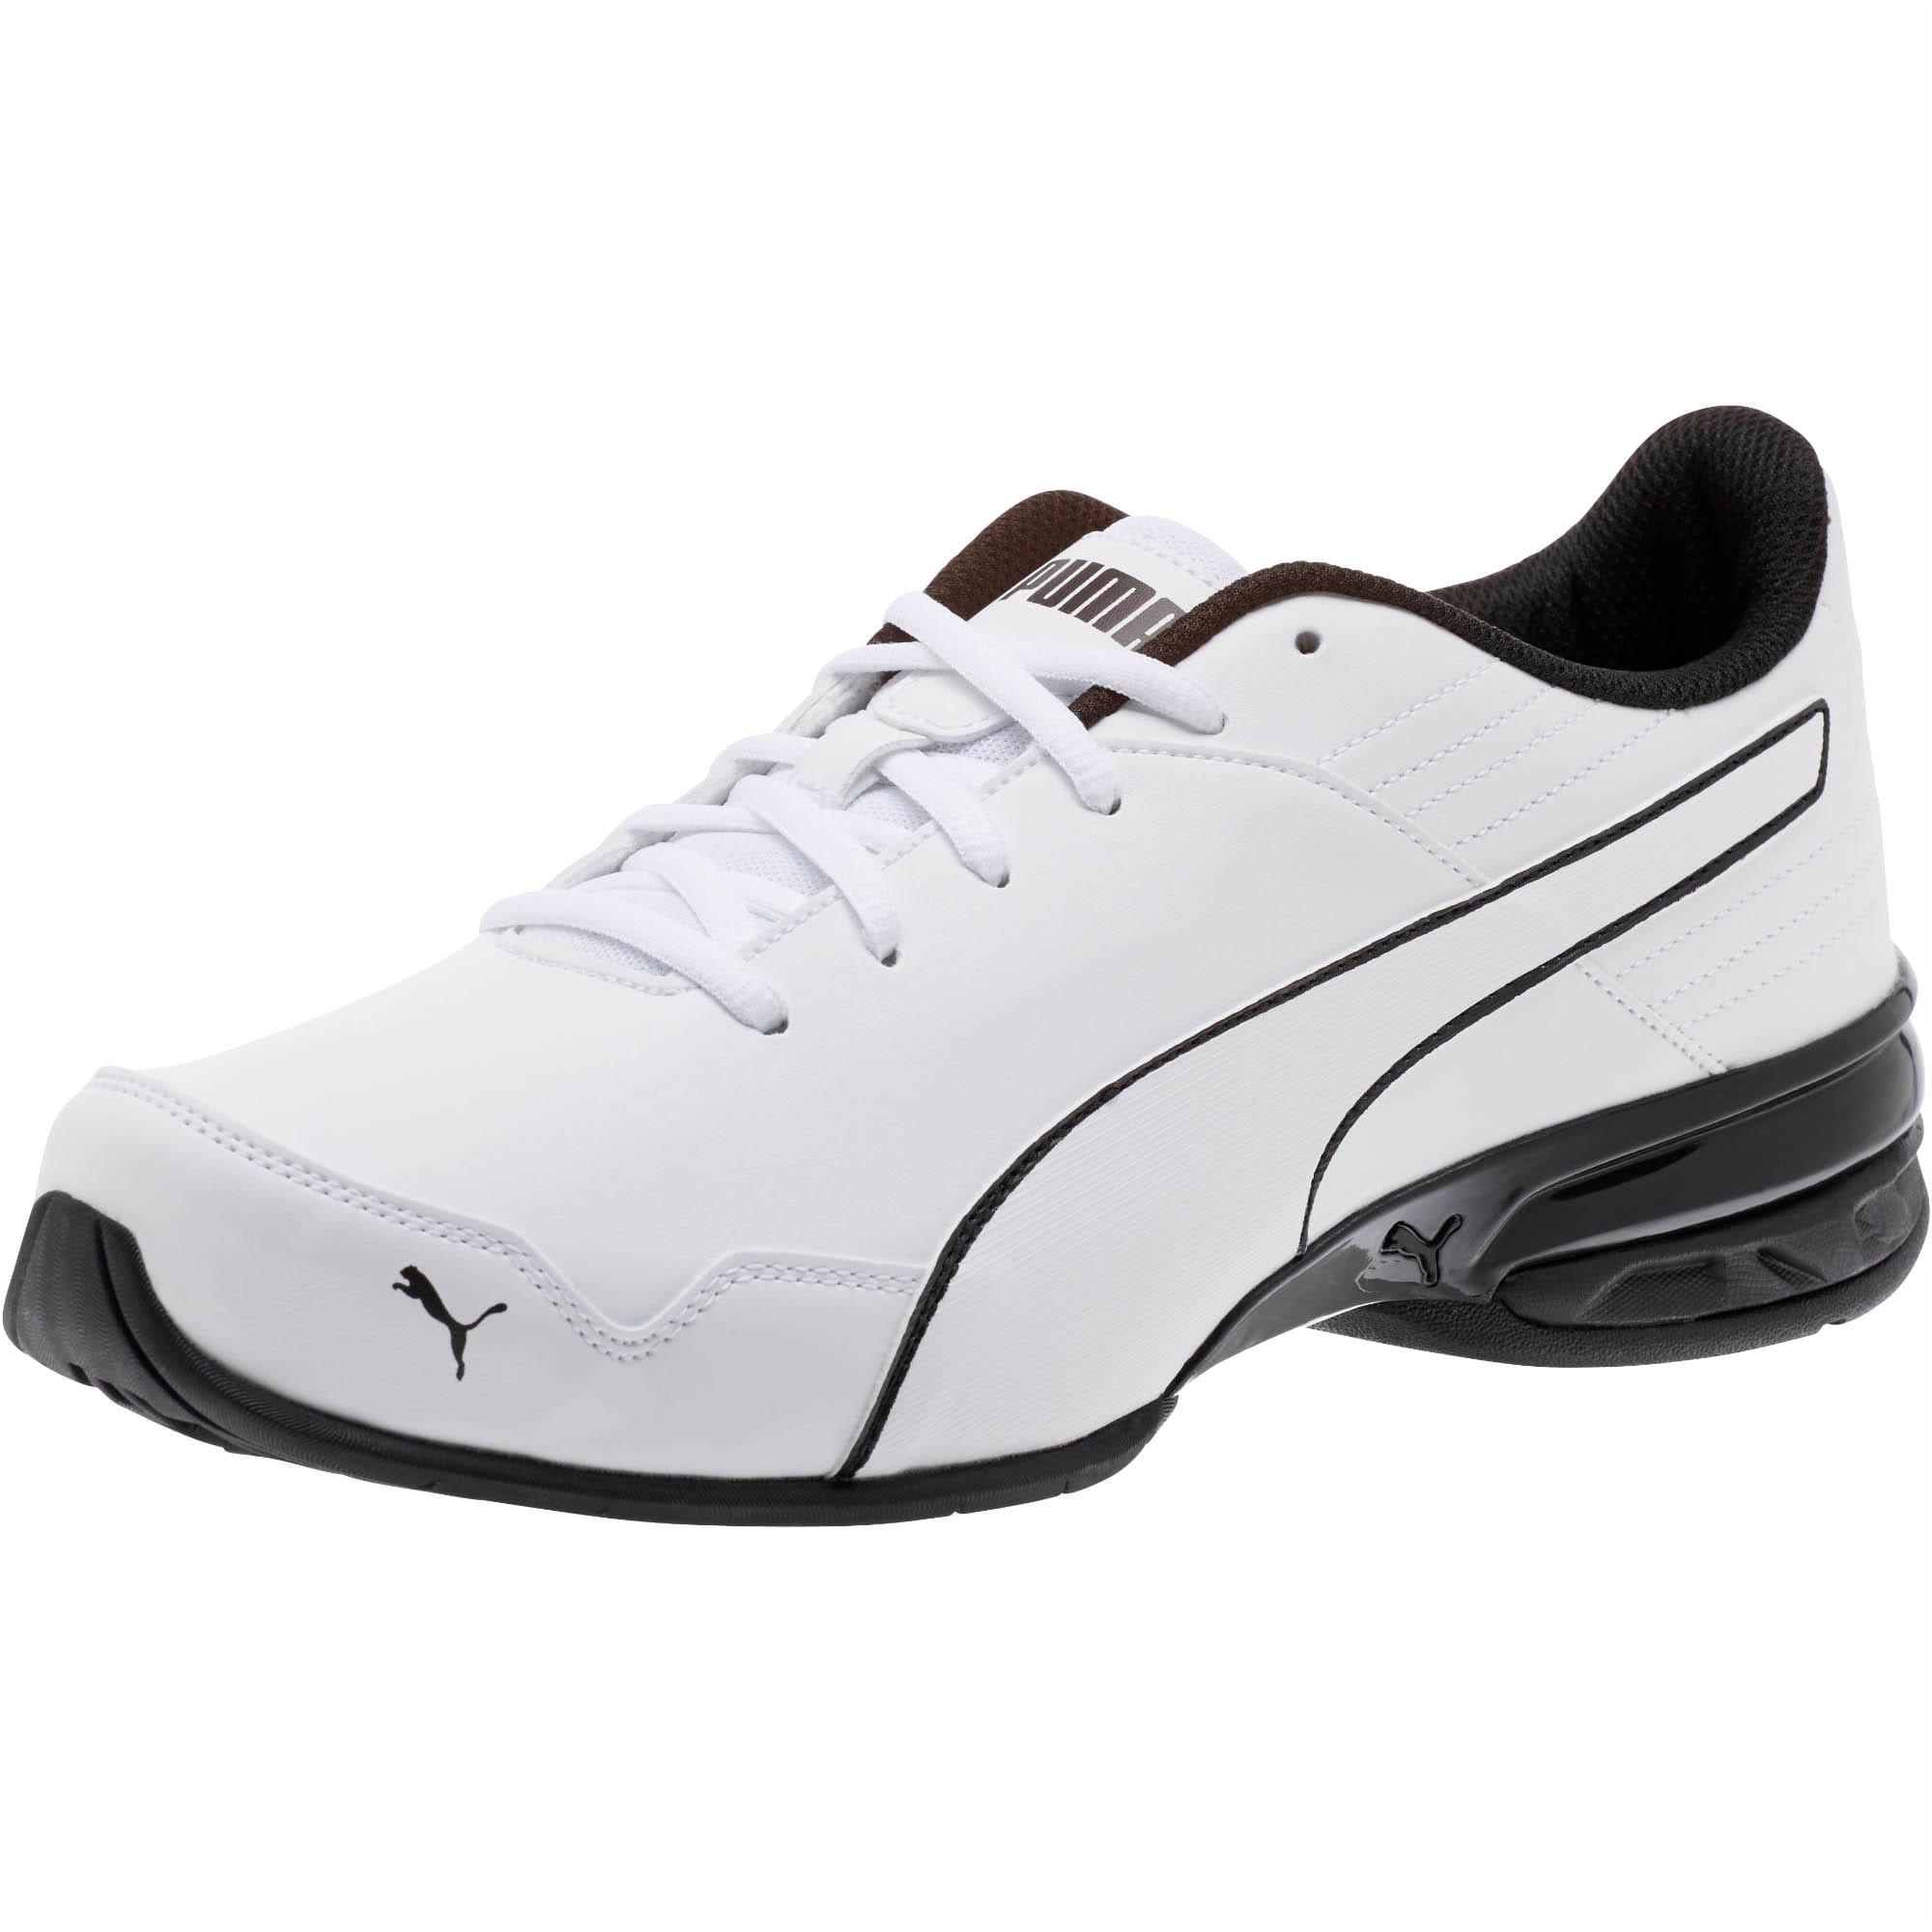 PUMA Synthetic Super Levitate Men's Running Shoes in White for Men - Lyst